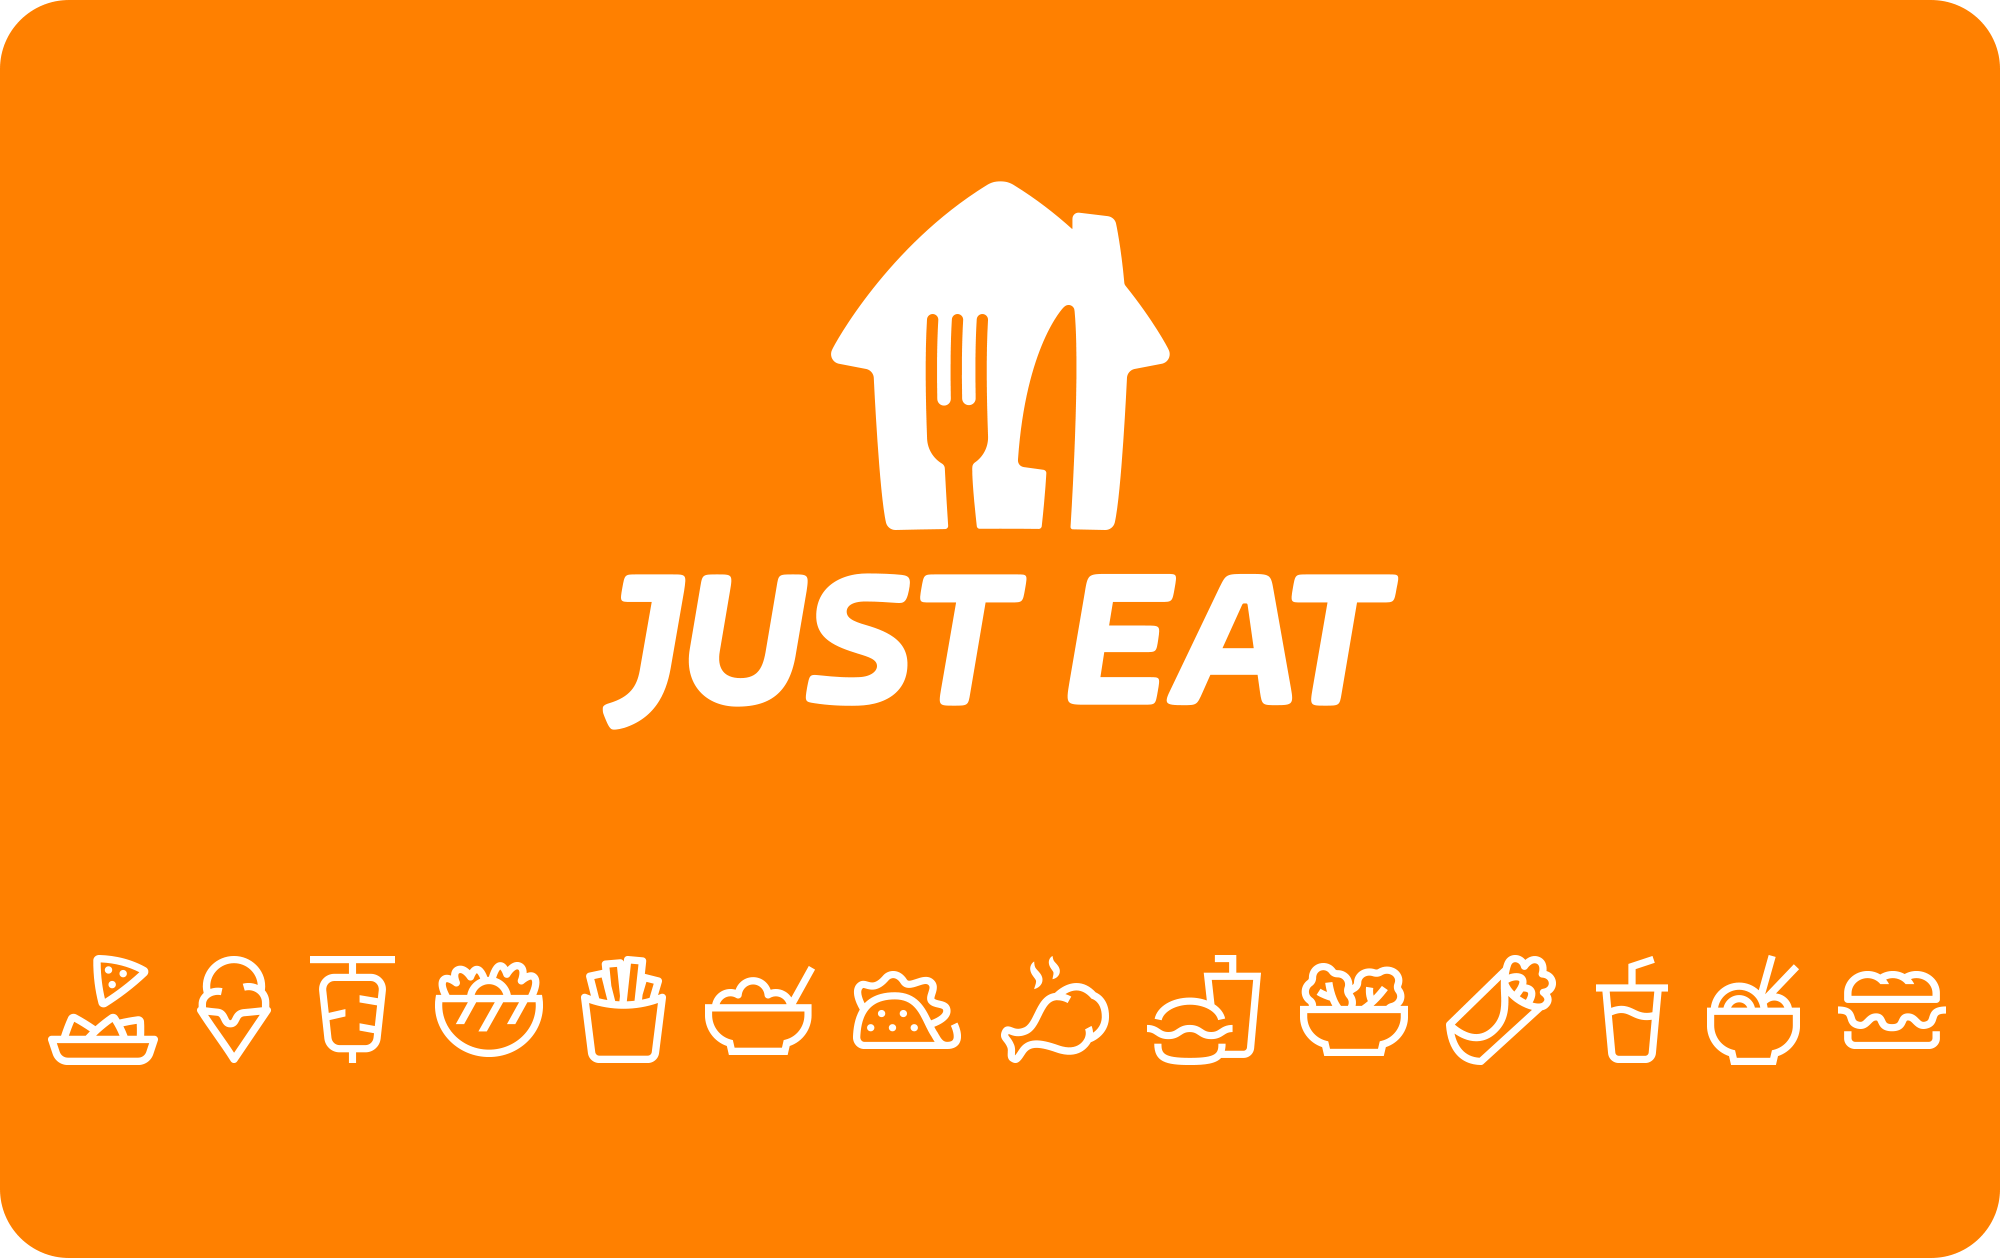 Just Eat £10 Gift Card UK 14.05$